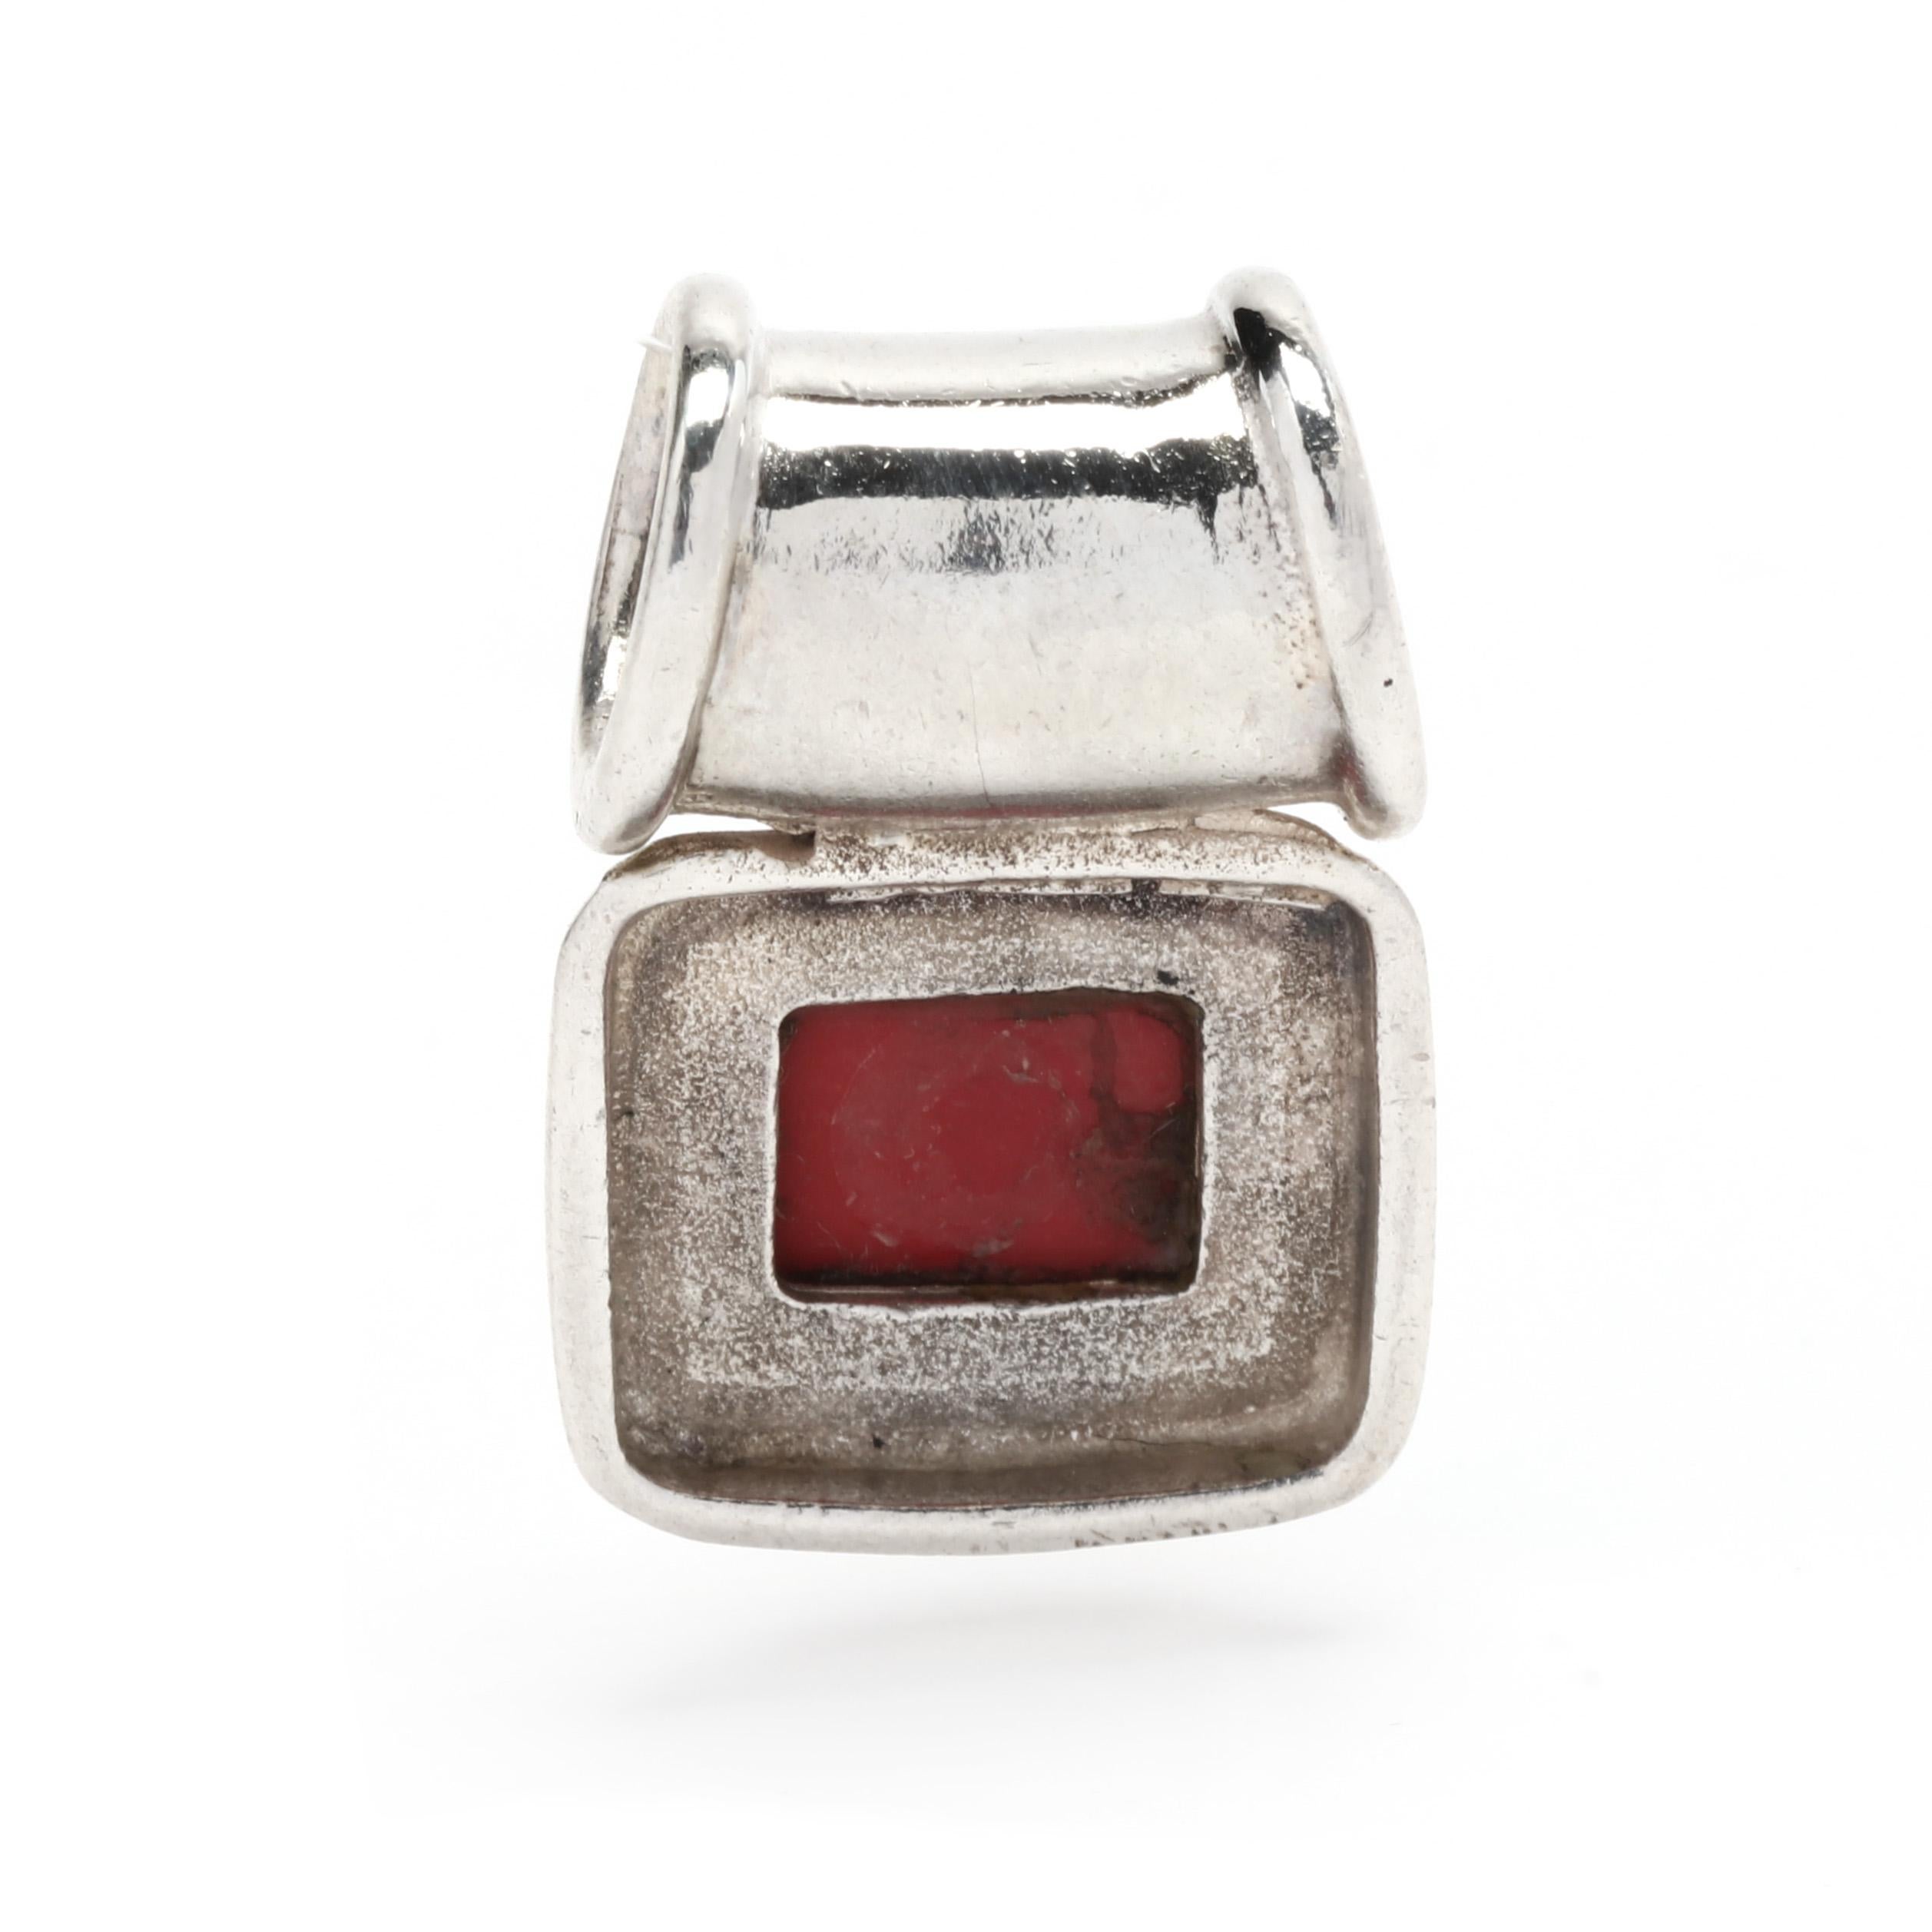 This beautiful and unique red coral pendant is crafted from sterling silver and set with a natural red coral stone. It has a length of 7/8 inch, making it perfect for everyday wear. The warm hue of the coral brings out the details of the intricate